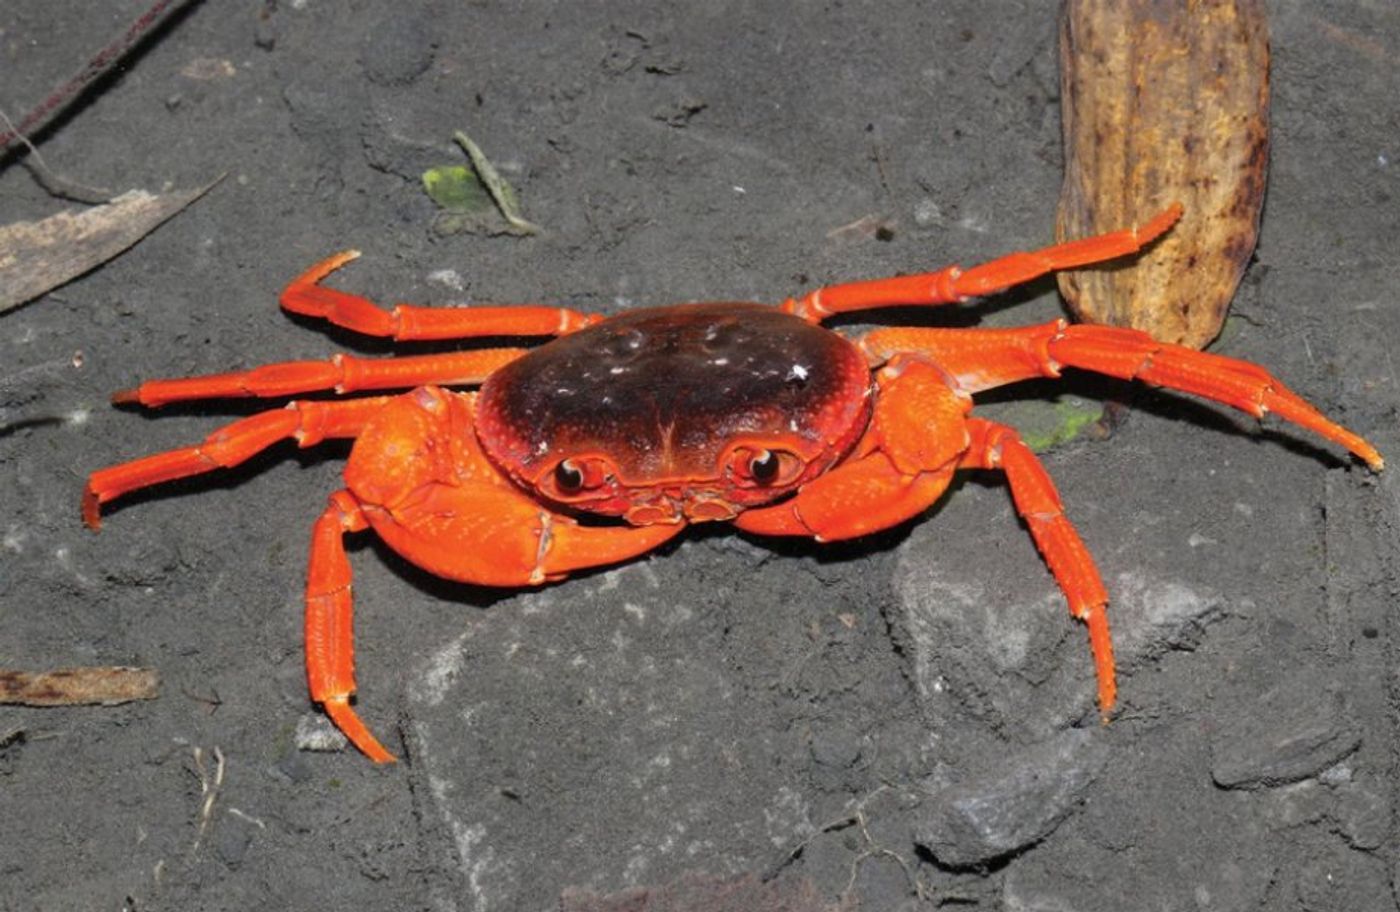 A completely new genus of crab has been discovered in a pet market in China.